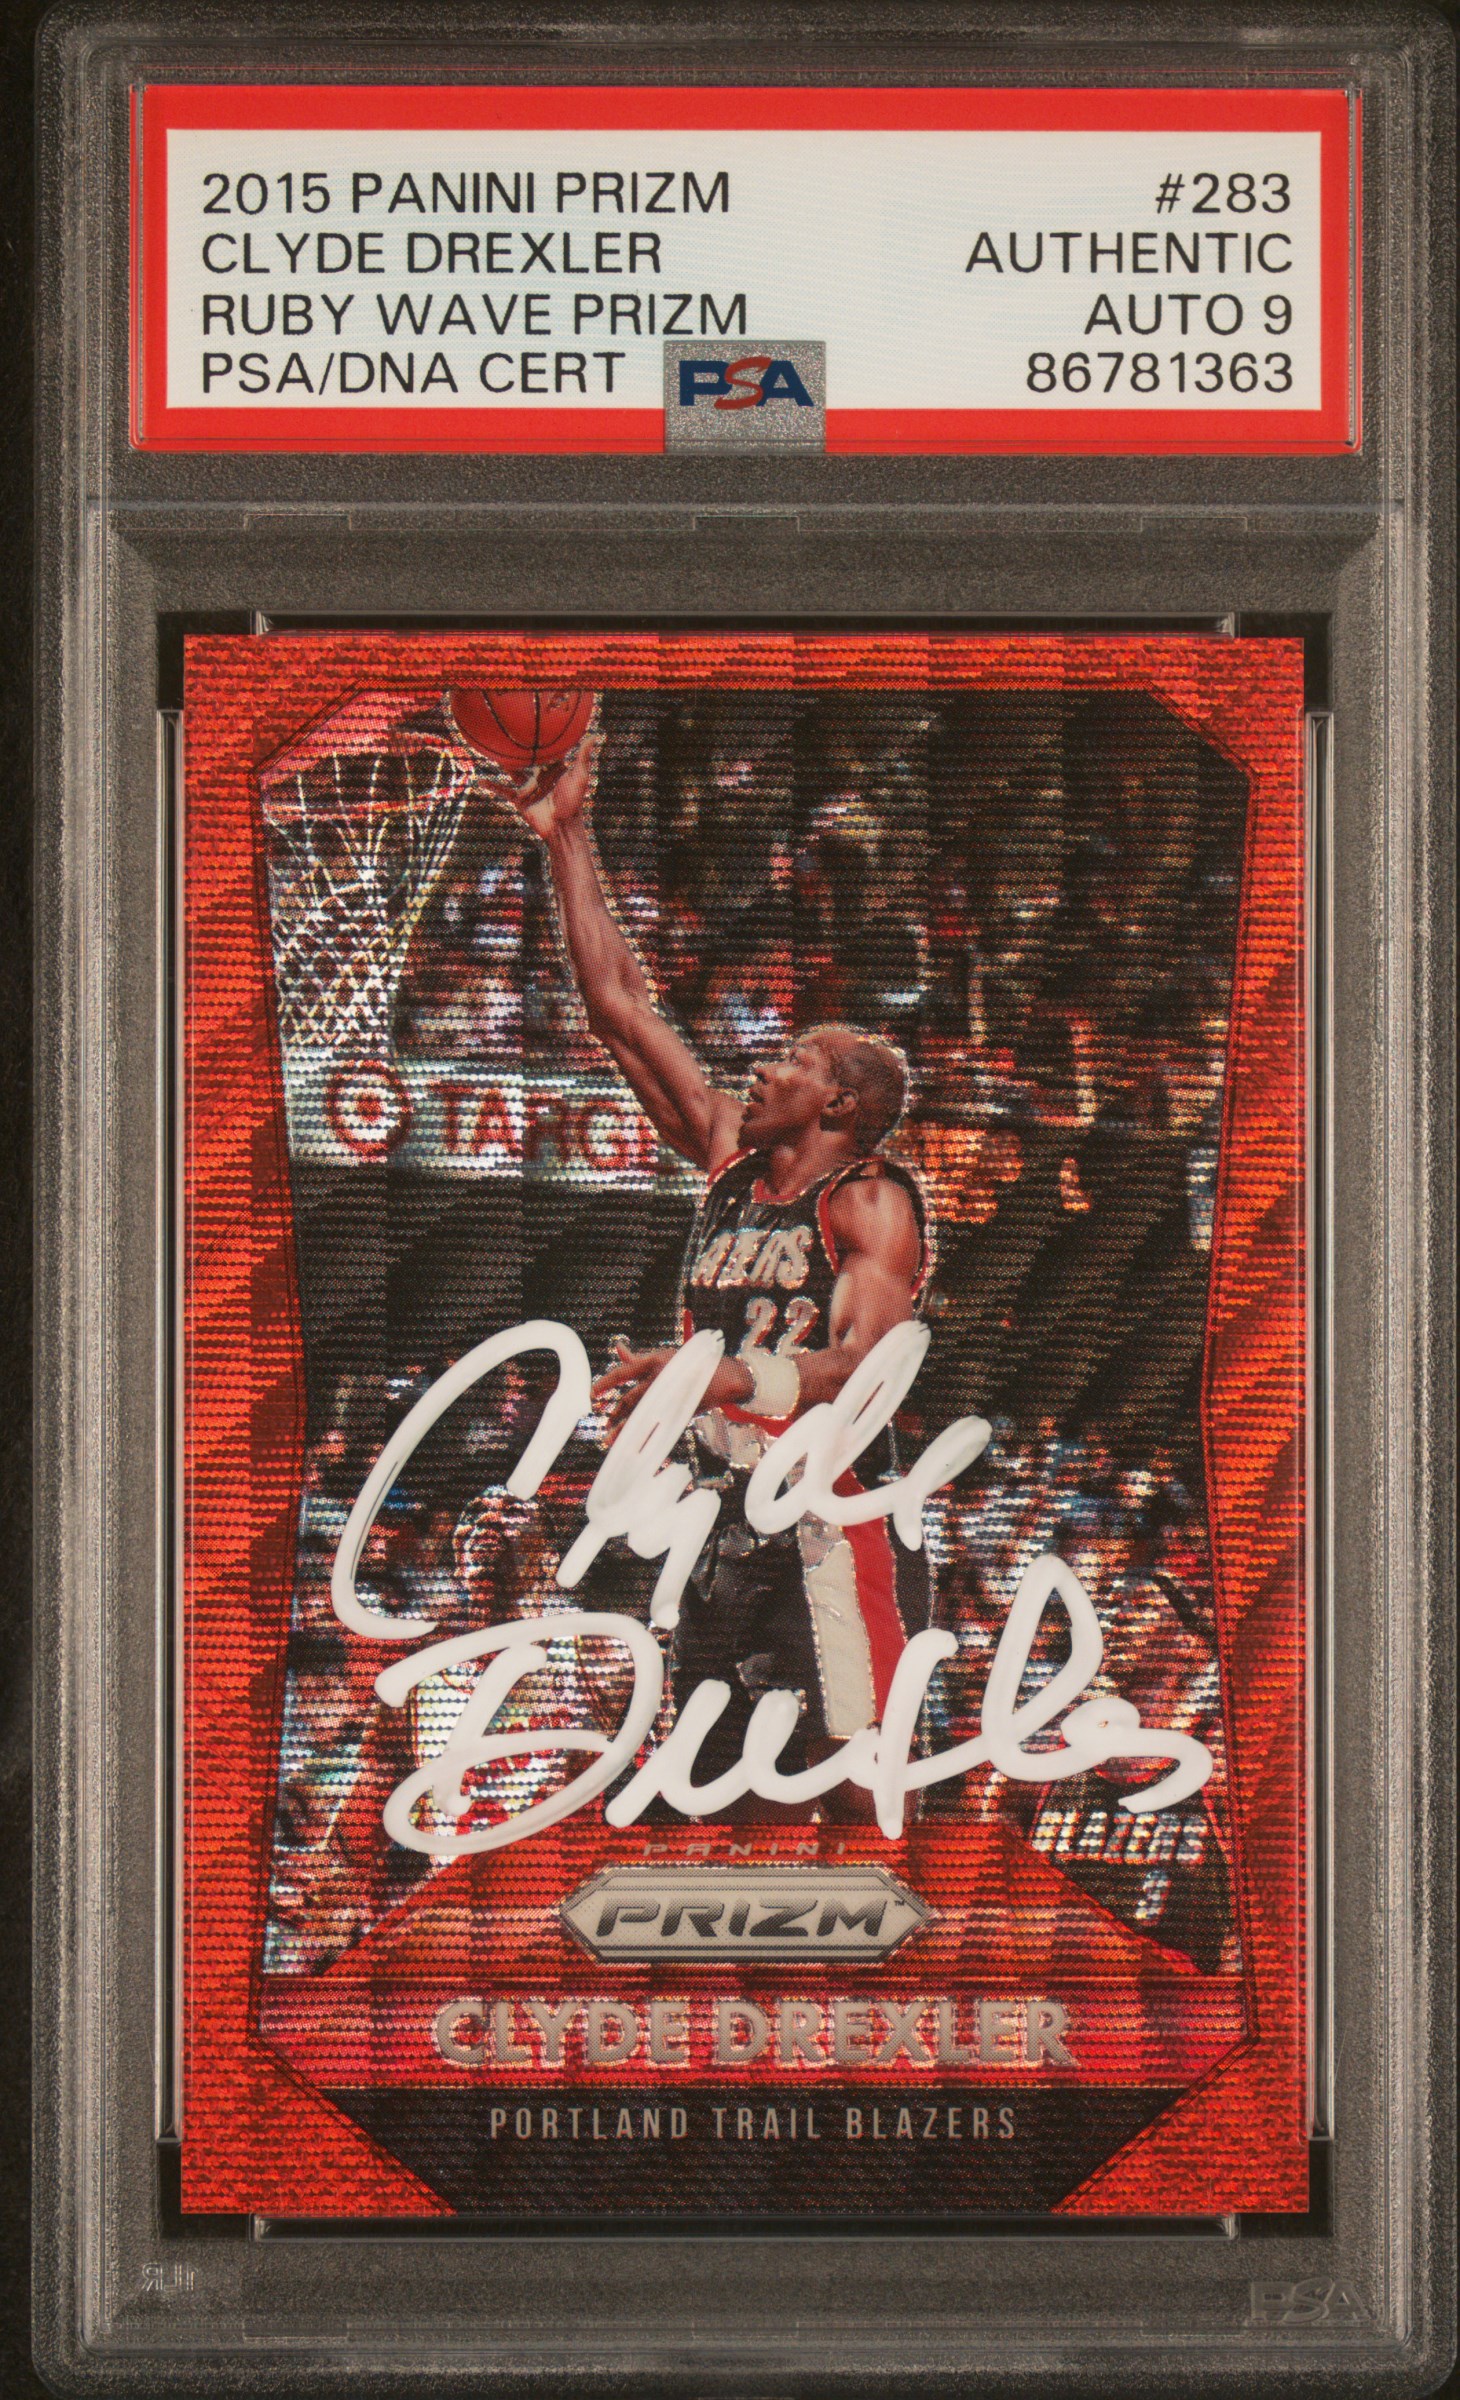 Clyde Drexler 2015 Panini Prizm Ruby Wave Red Card #283 Auto PSA 9 139/350